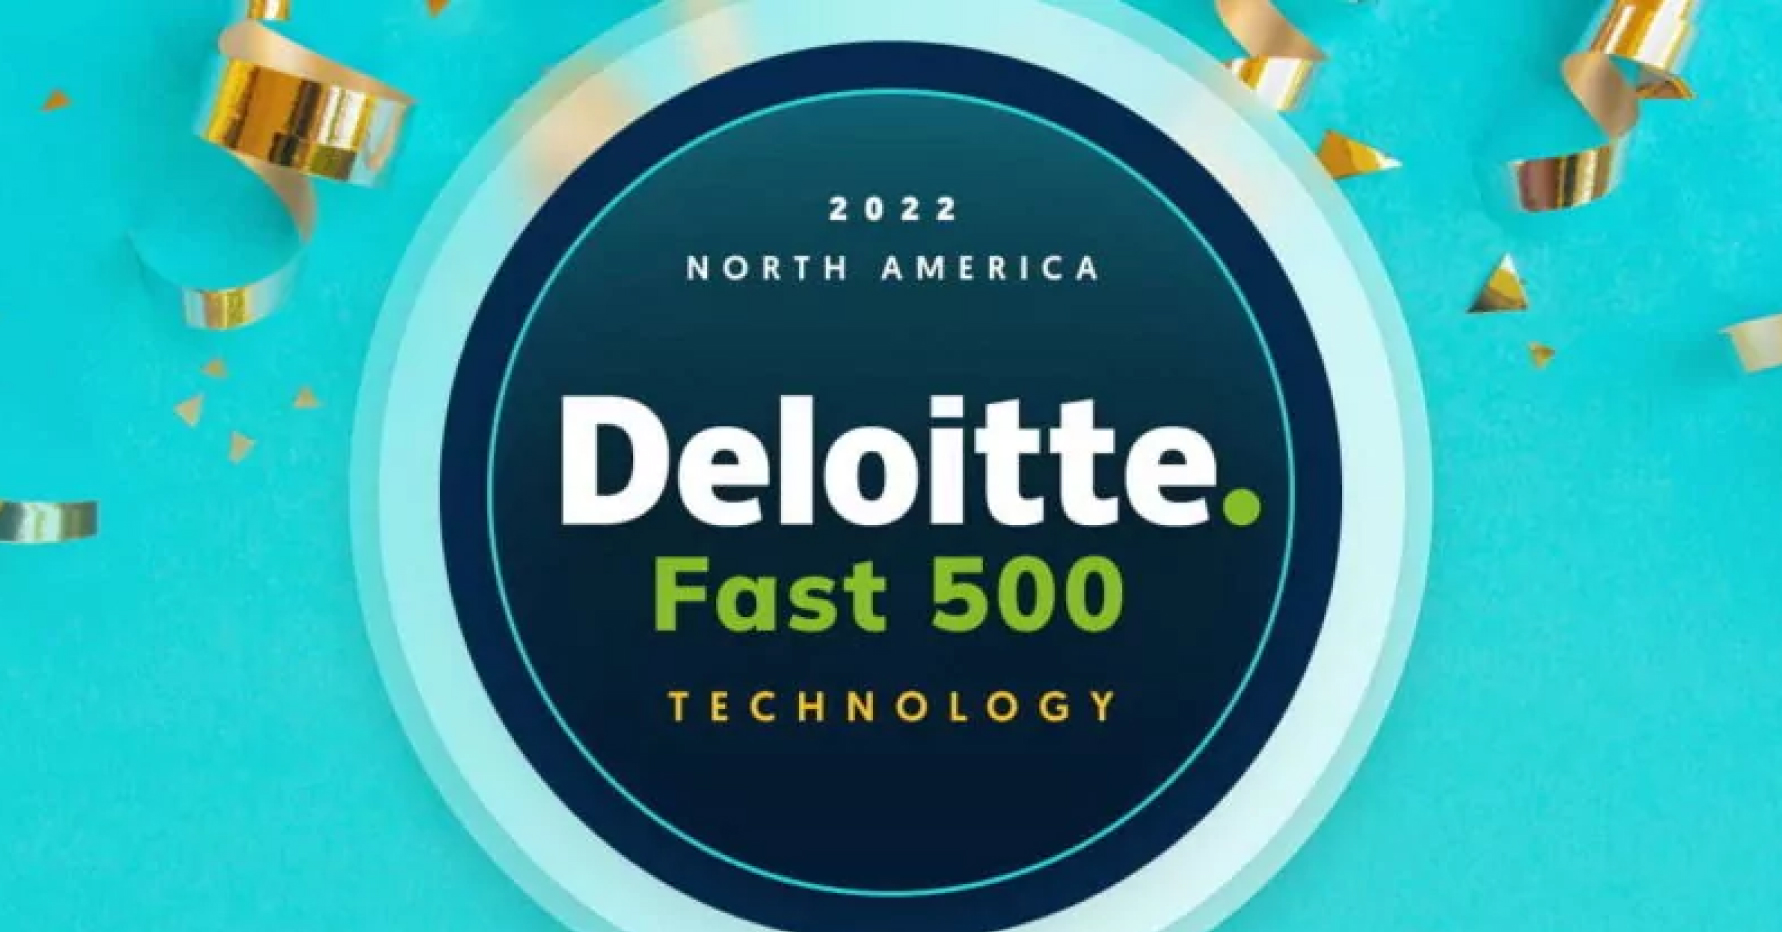 Banner image that says 2022 North America Deloitte Fast 500 Technology